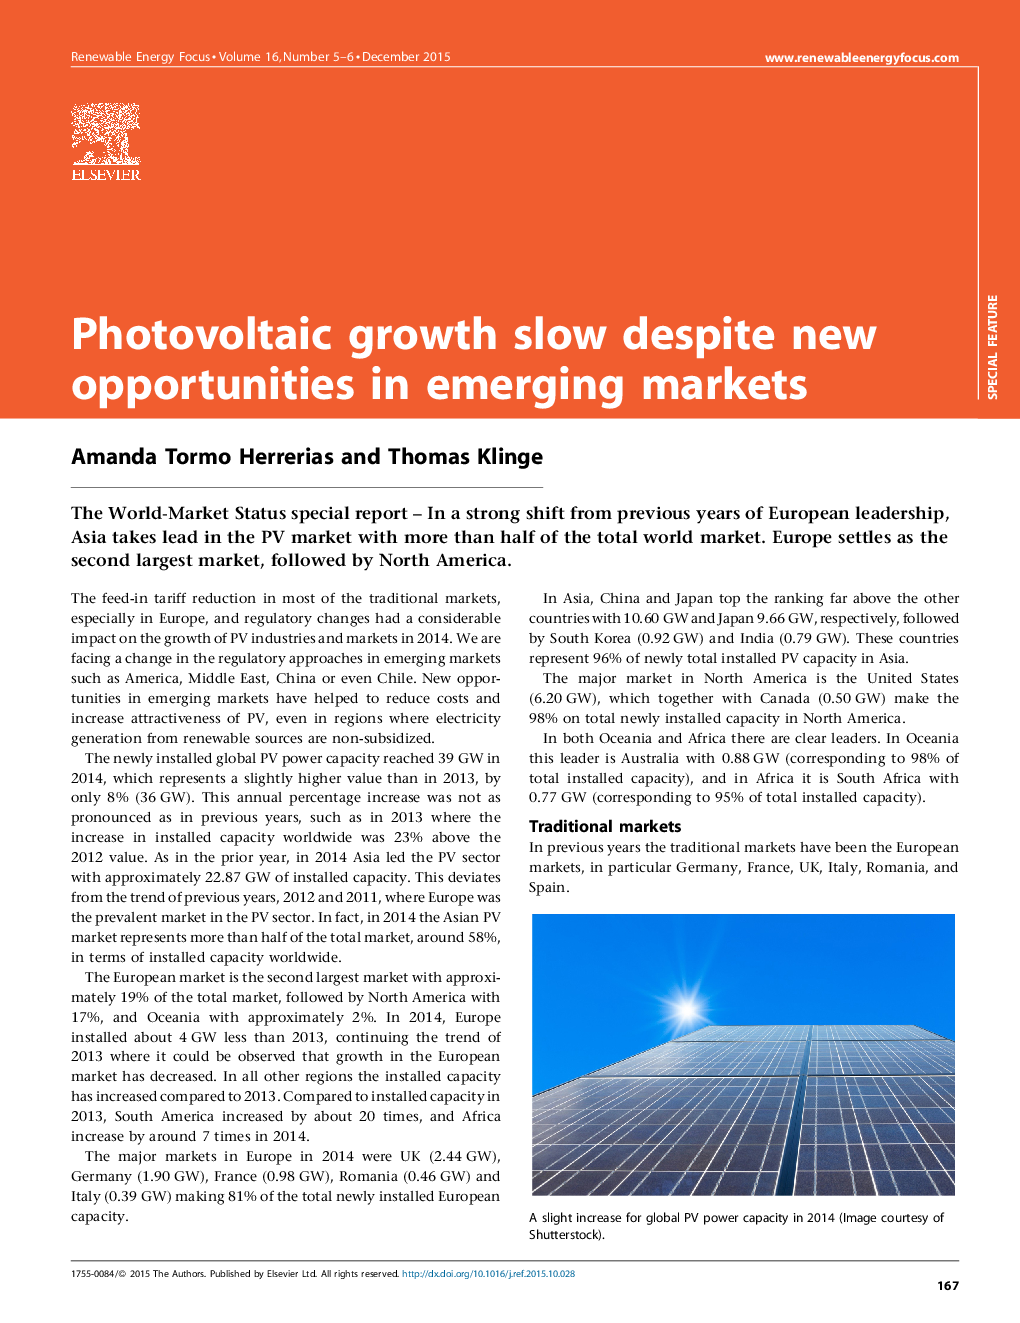 Photovoltaic growth slow despite new opportunities in emerging markets